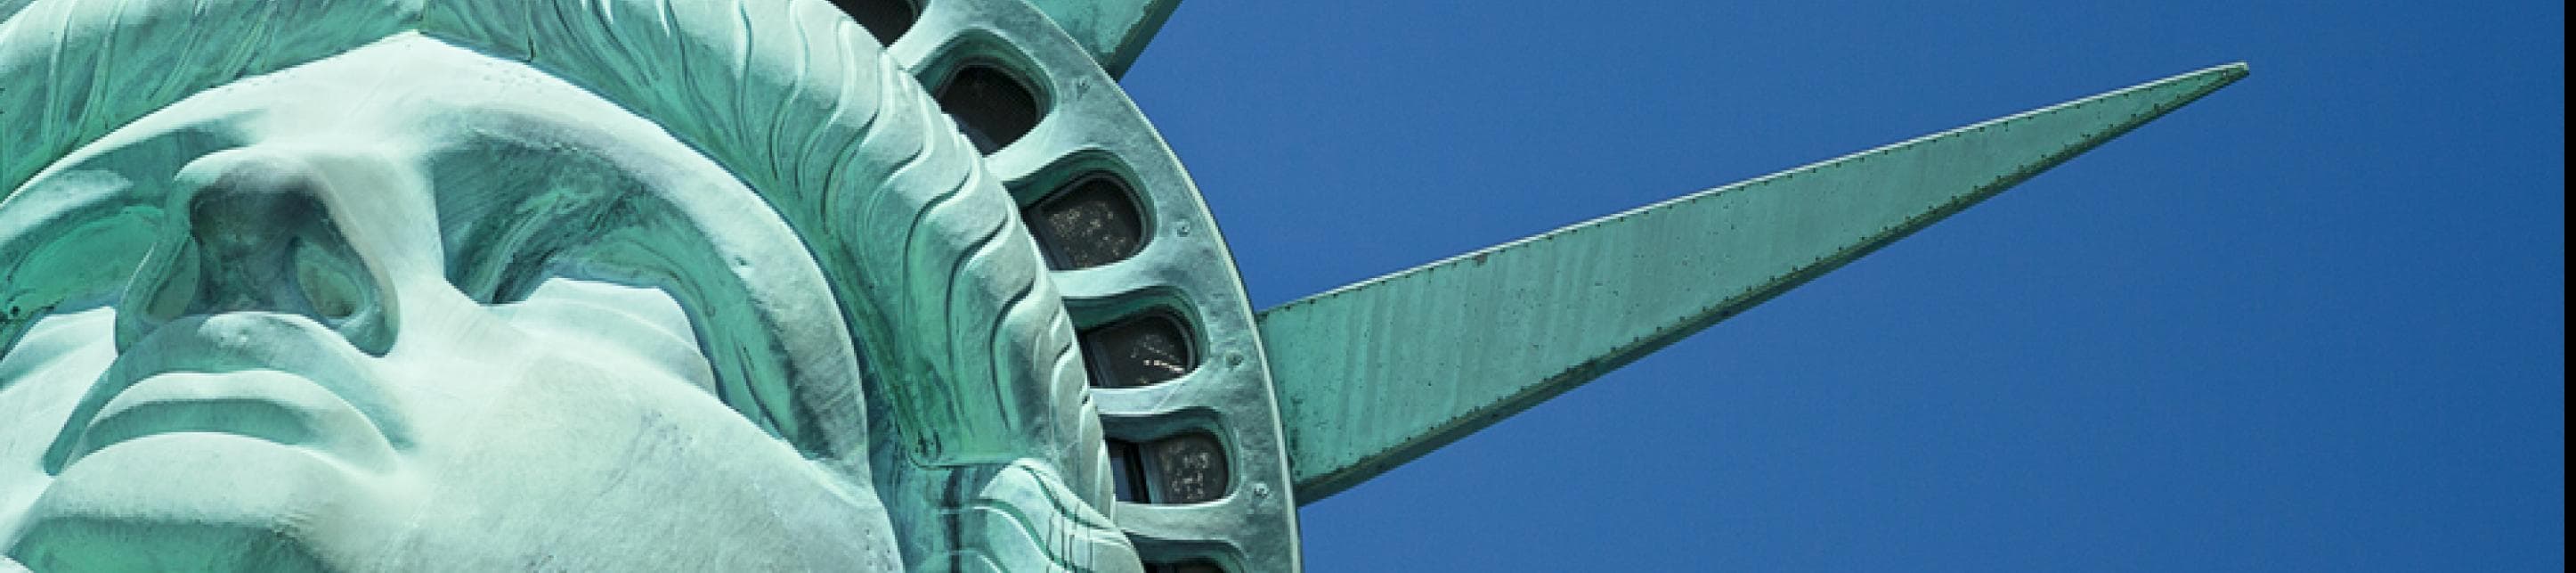 Cropped image of the face of The Statue of Liberty